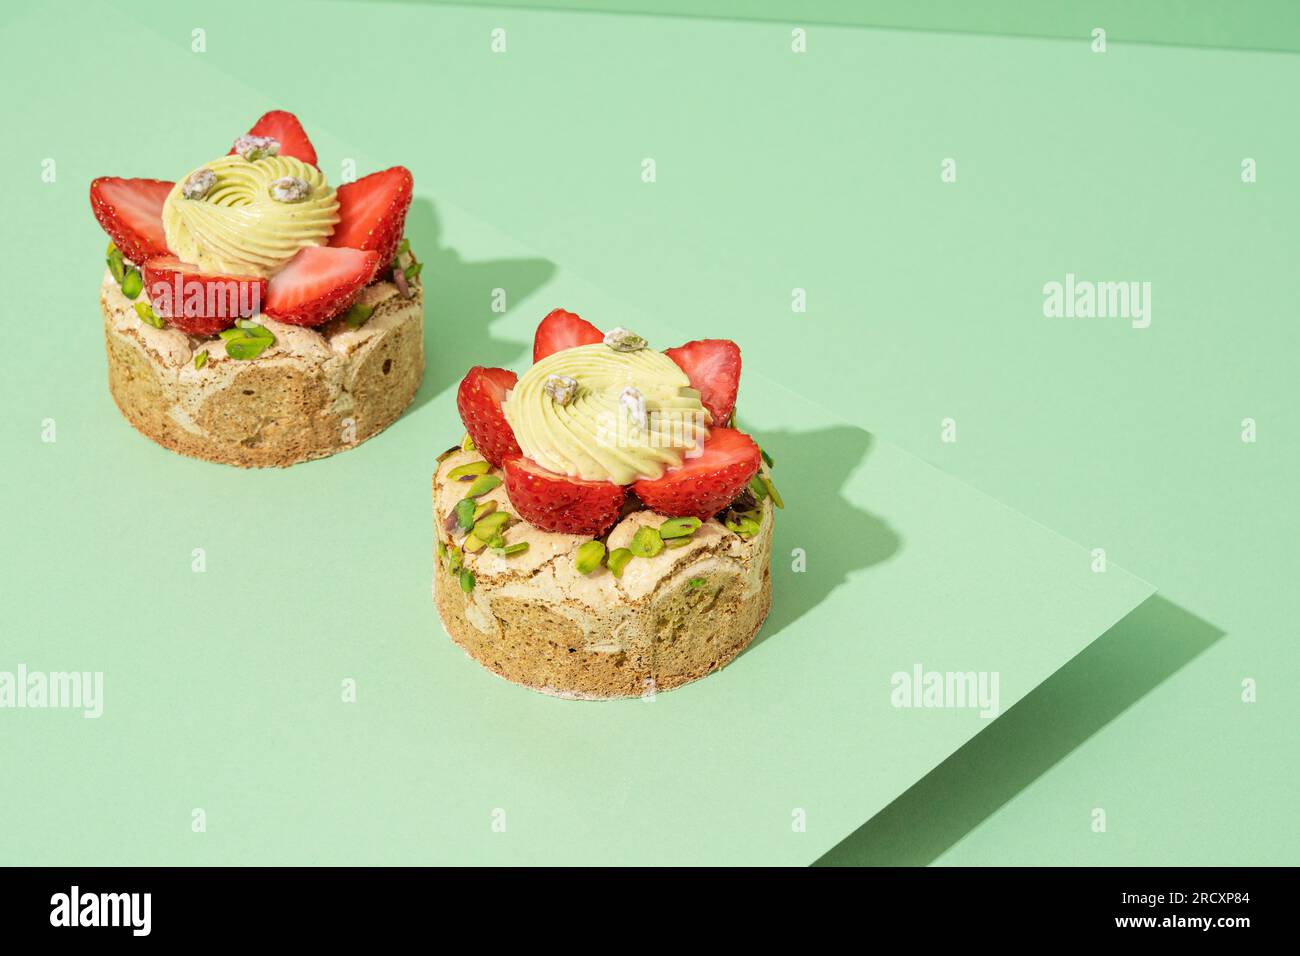 Two delectable desserts topped with fresh strawberries sitting on a plain white background Stock Photo